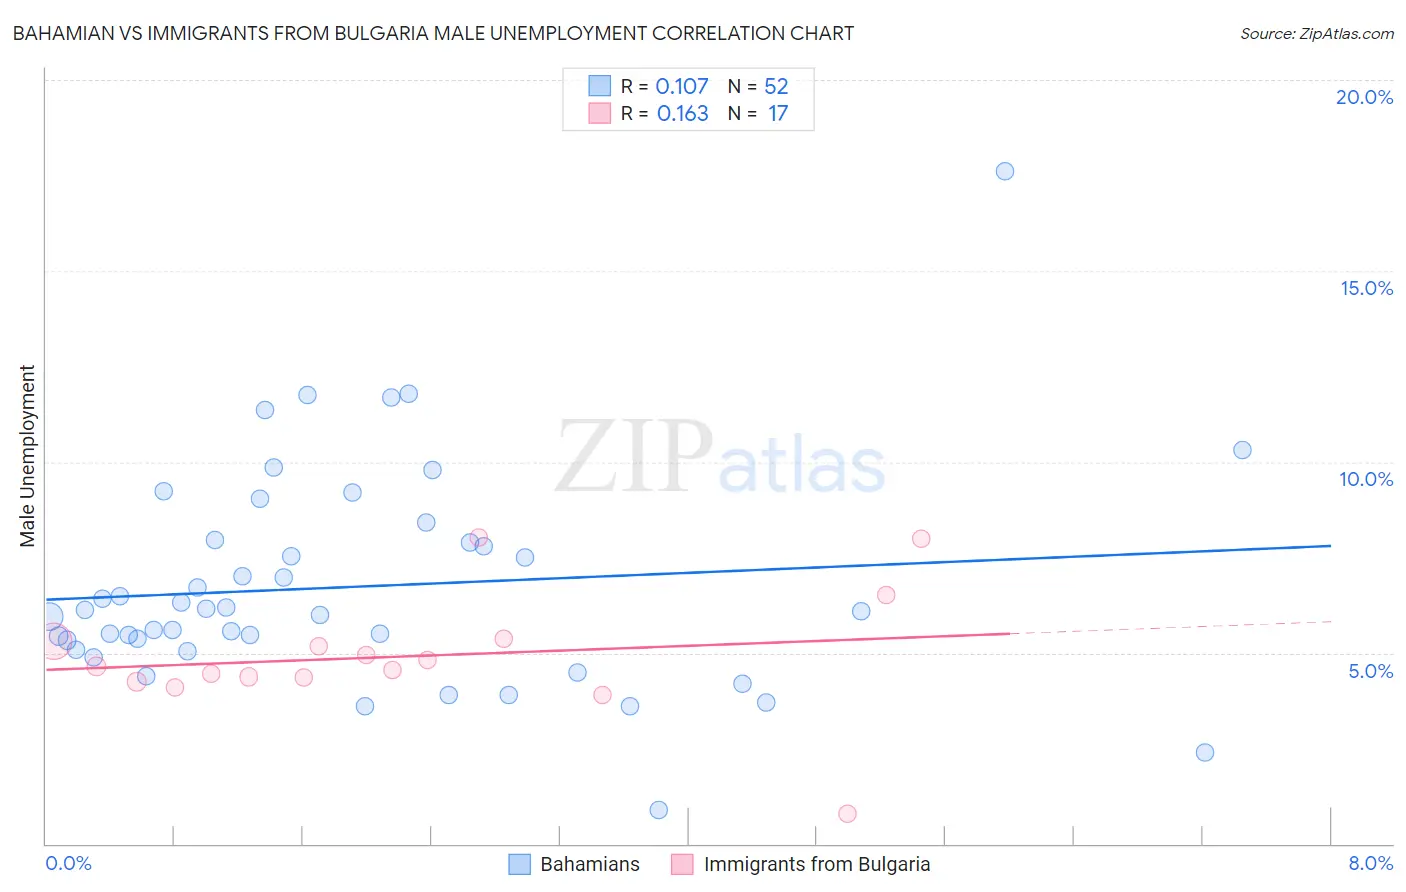 Bahamian vs Immigrants from Bulgaria Male Unemployment